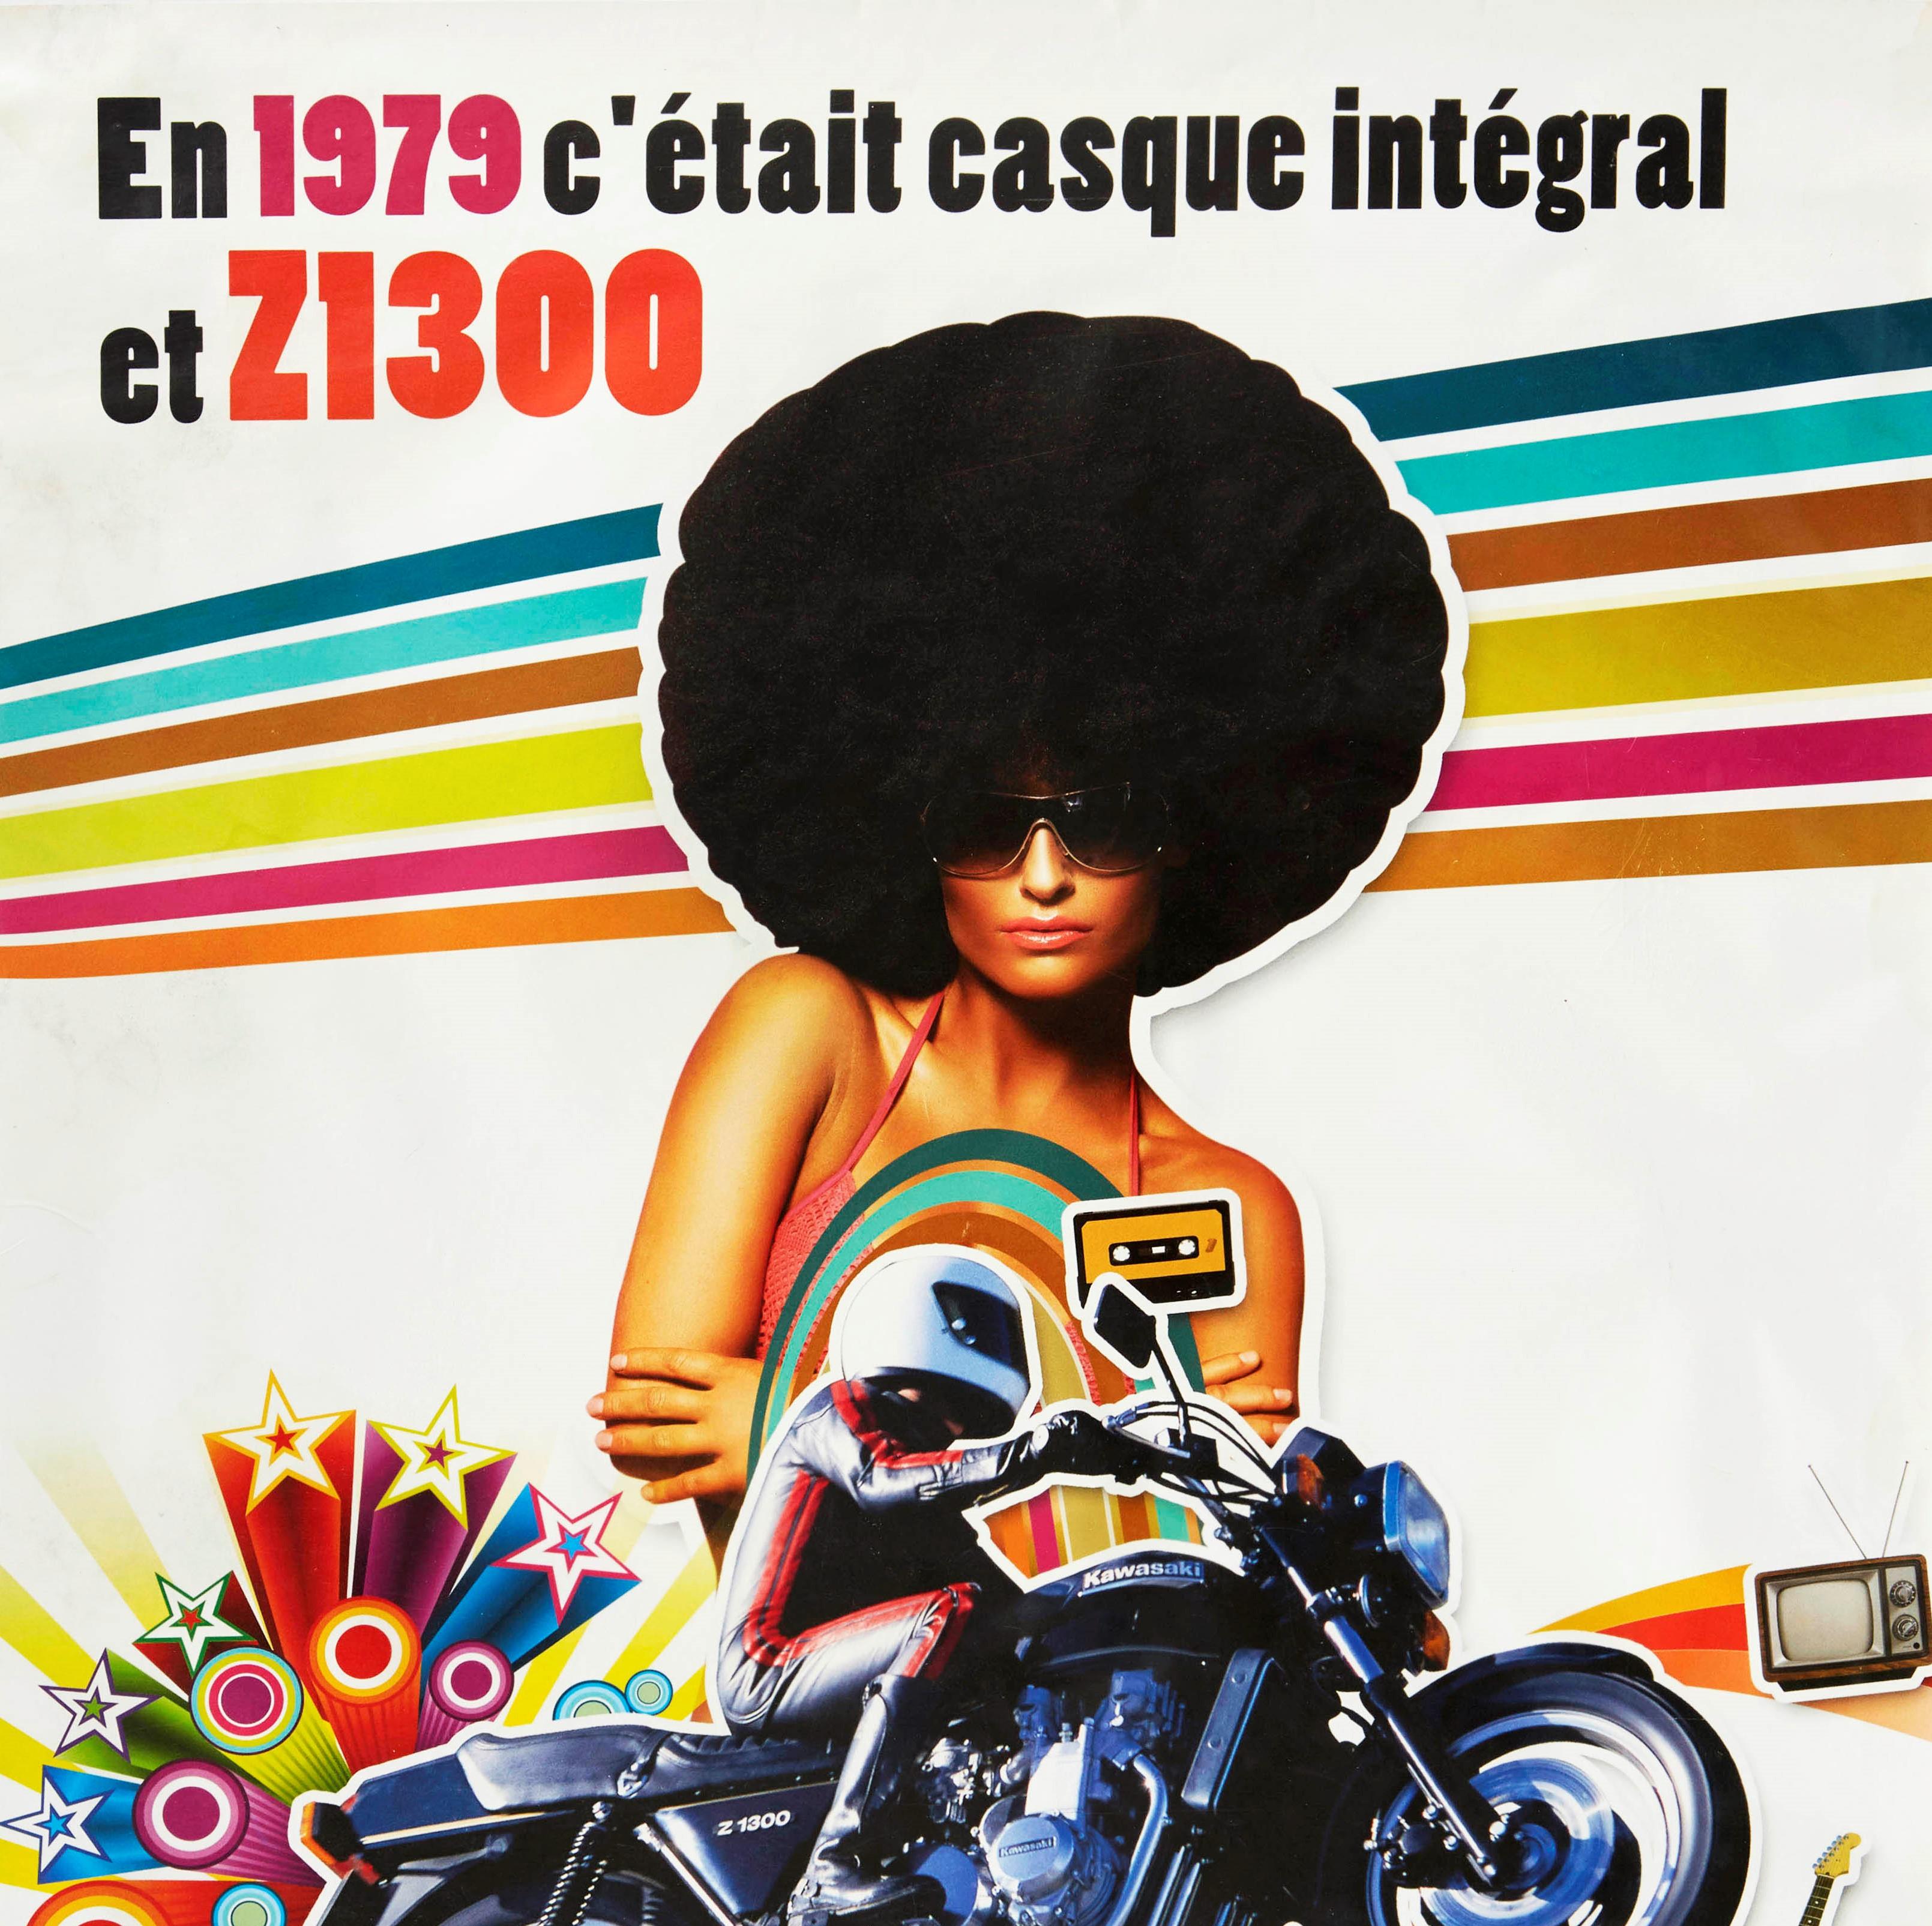 Original vintage Kawasaki motorcycle advertising poster - En 1979 c'etait casque integral et Z1300 / 30 ans deja - featuring a colorful retro seventies design depicting a young lady wearing sunglasses and standing with her arms crossed behind a